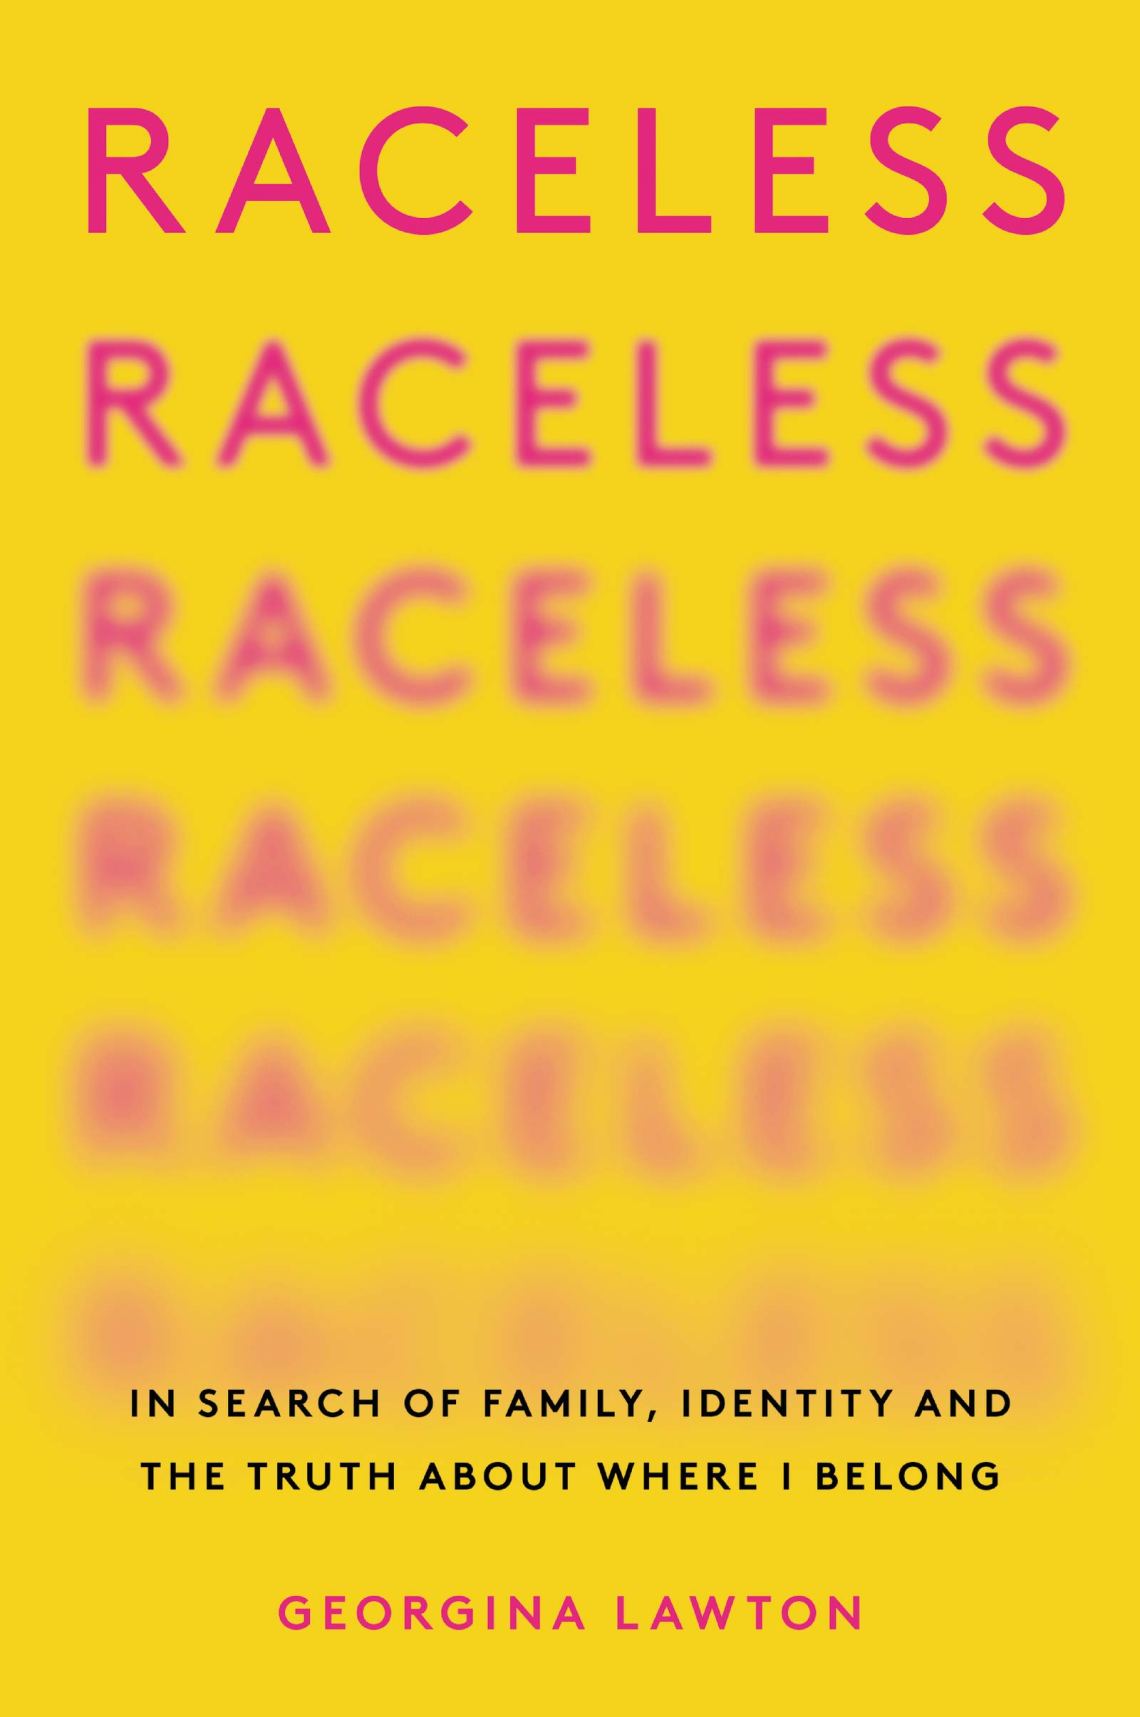 Image of book, Raceless: In Search of Family, Identity, and the Truth About Where I Belong
by Georgina Lawton